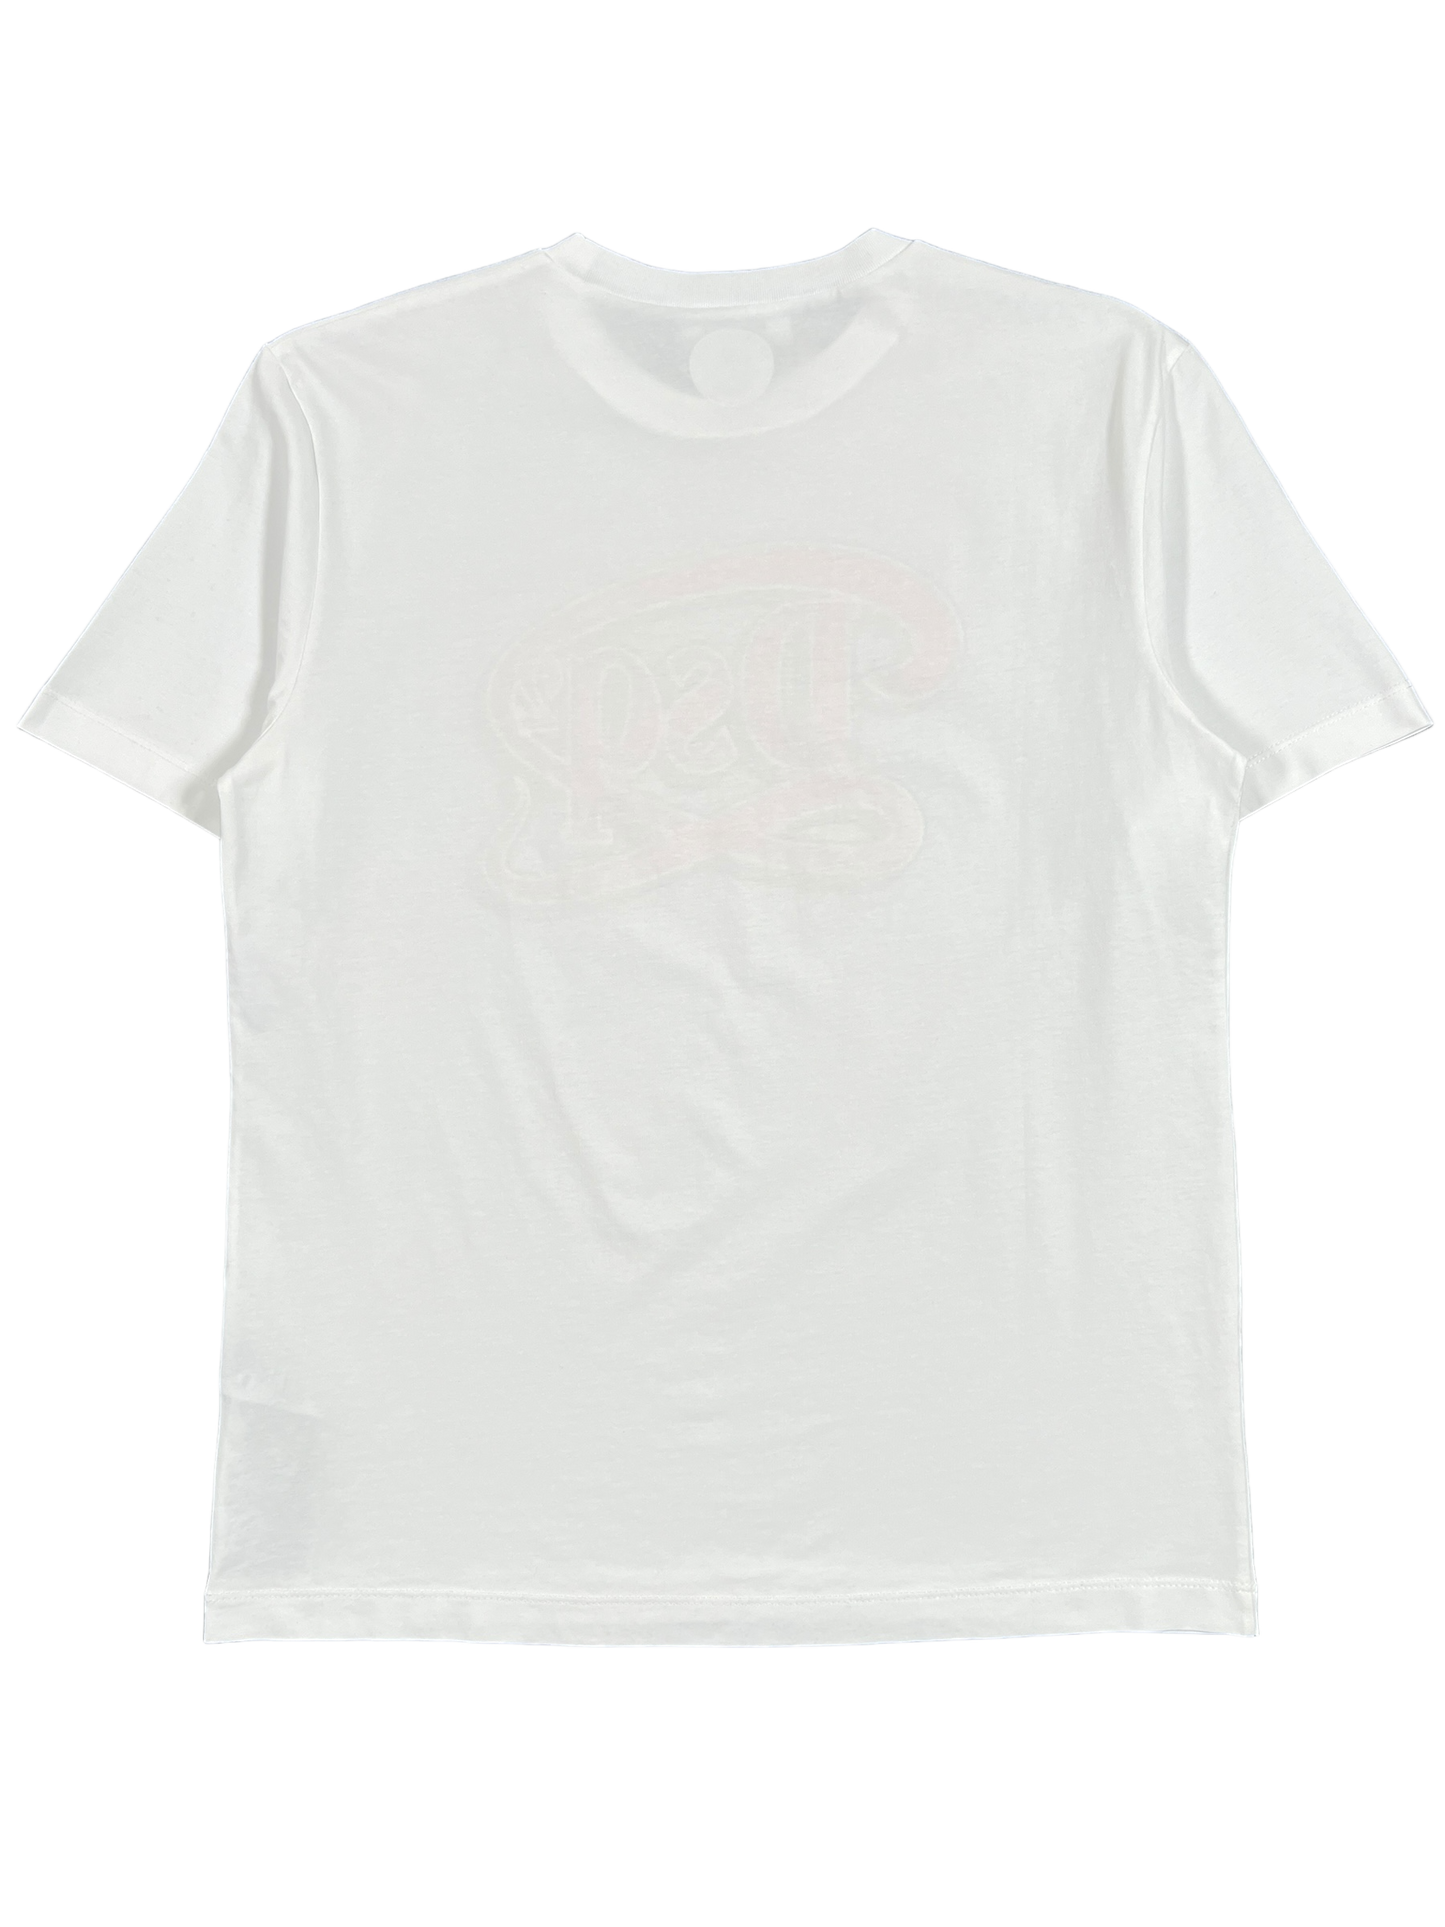 DSQUARED2 S71GD1387 regular fit tee in white with a faint logo on the front.